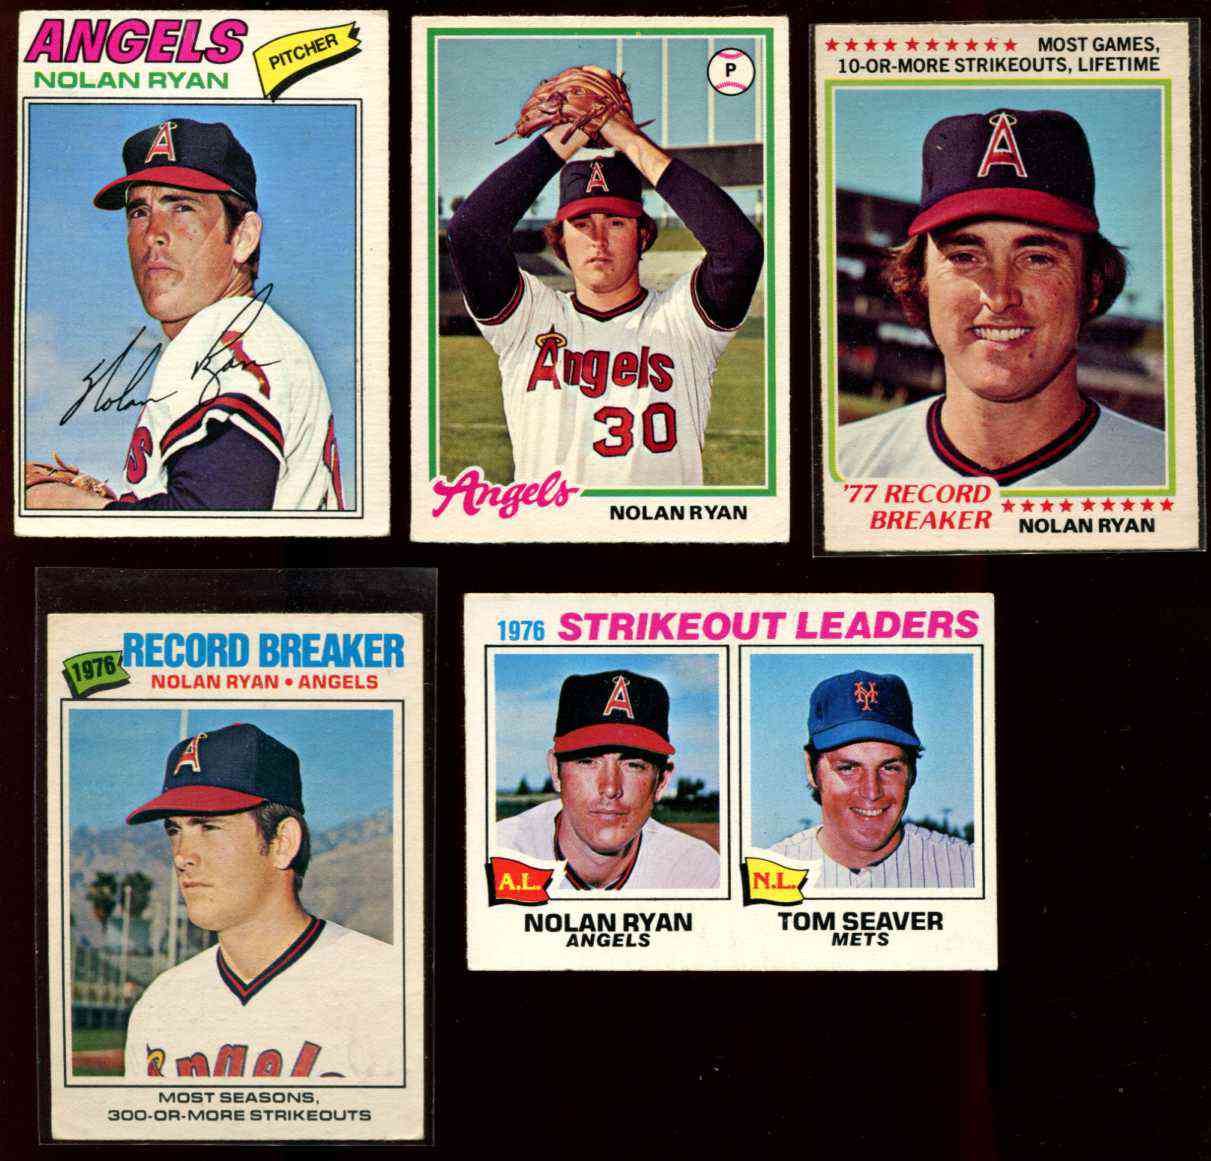 1978 O-Pee-Chee/OPC #241 Nolan Ryan RB ('Most Games 10 or More Strikeouts') Baseball cards value